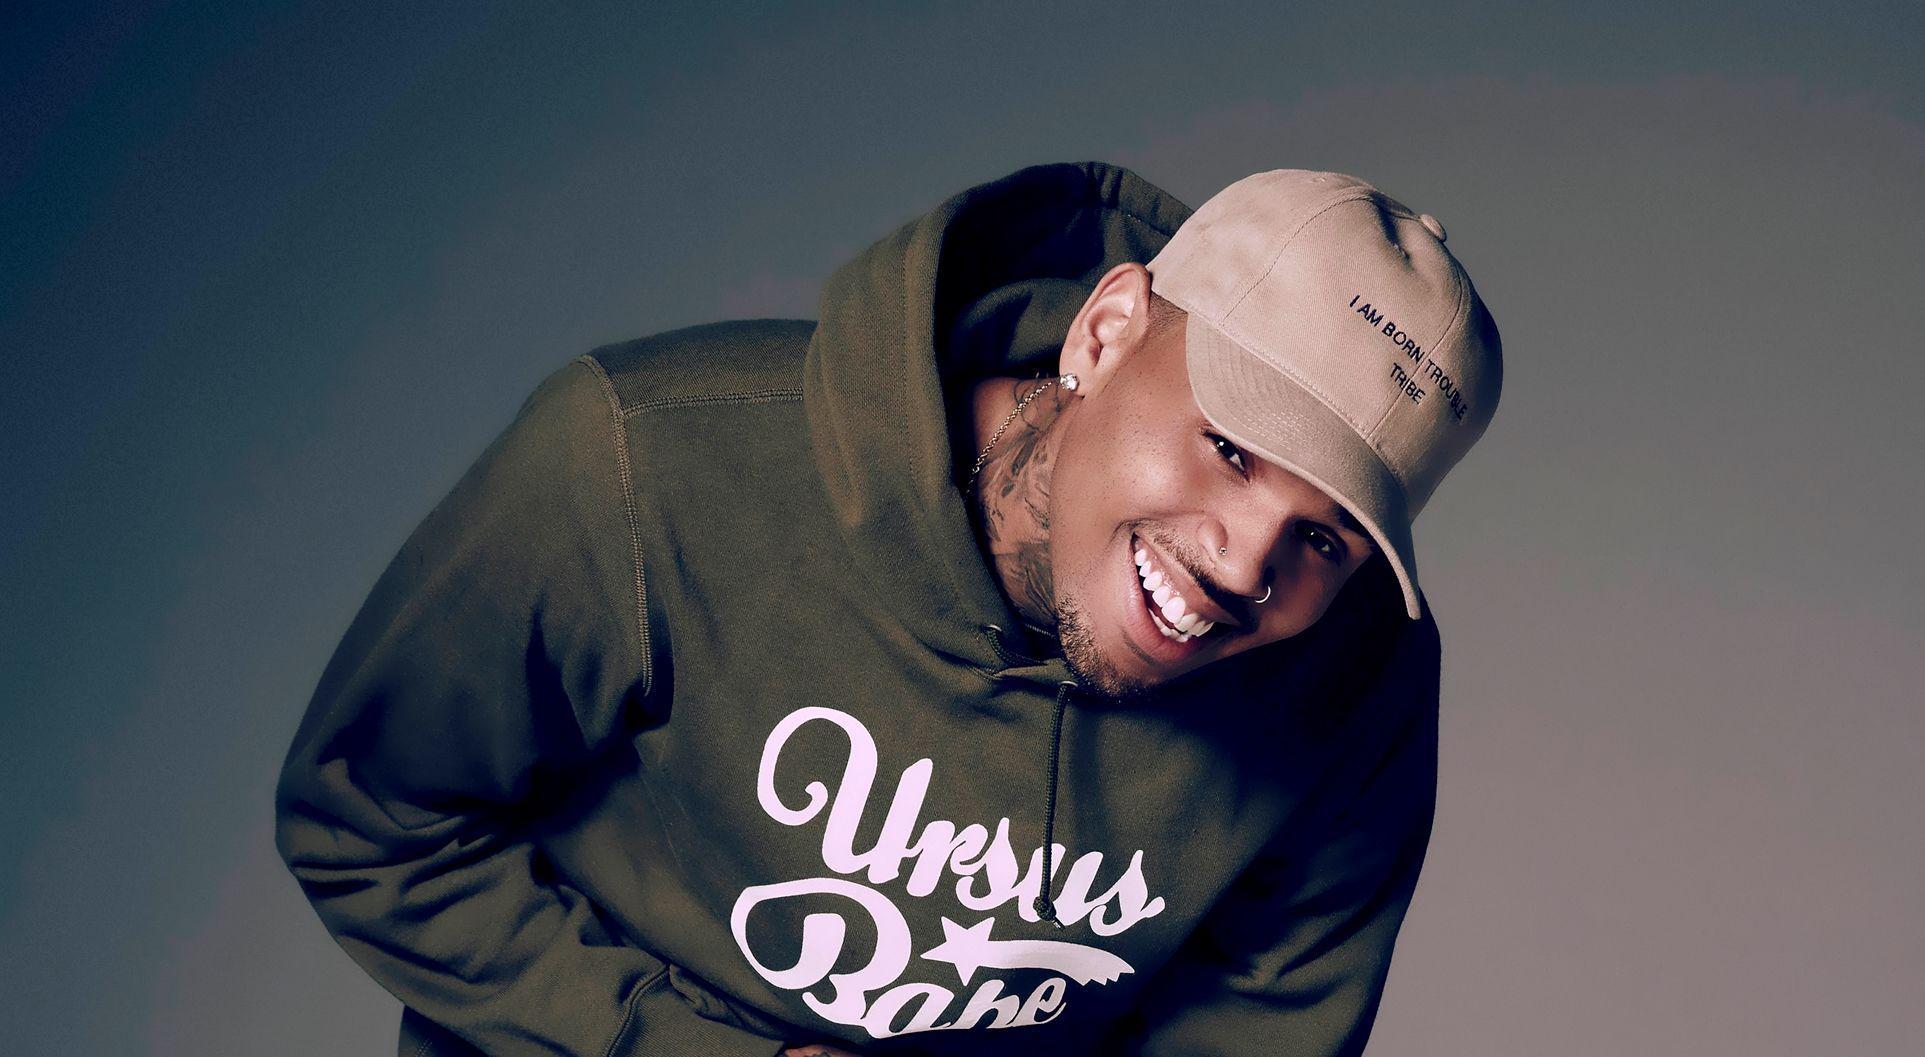 Showing posts & media for Chris brown 2017 wallpaper